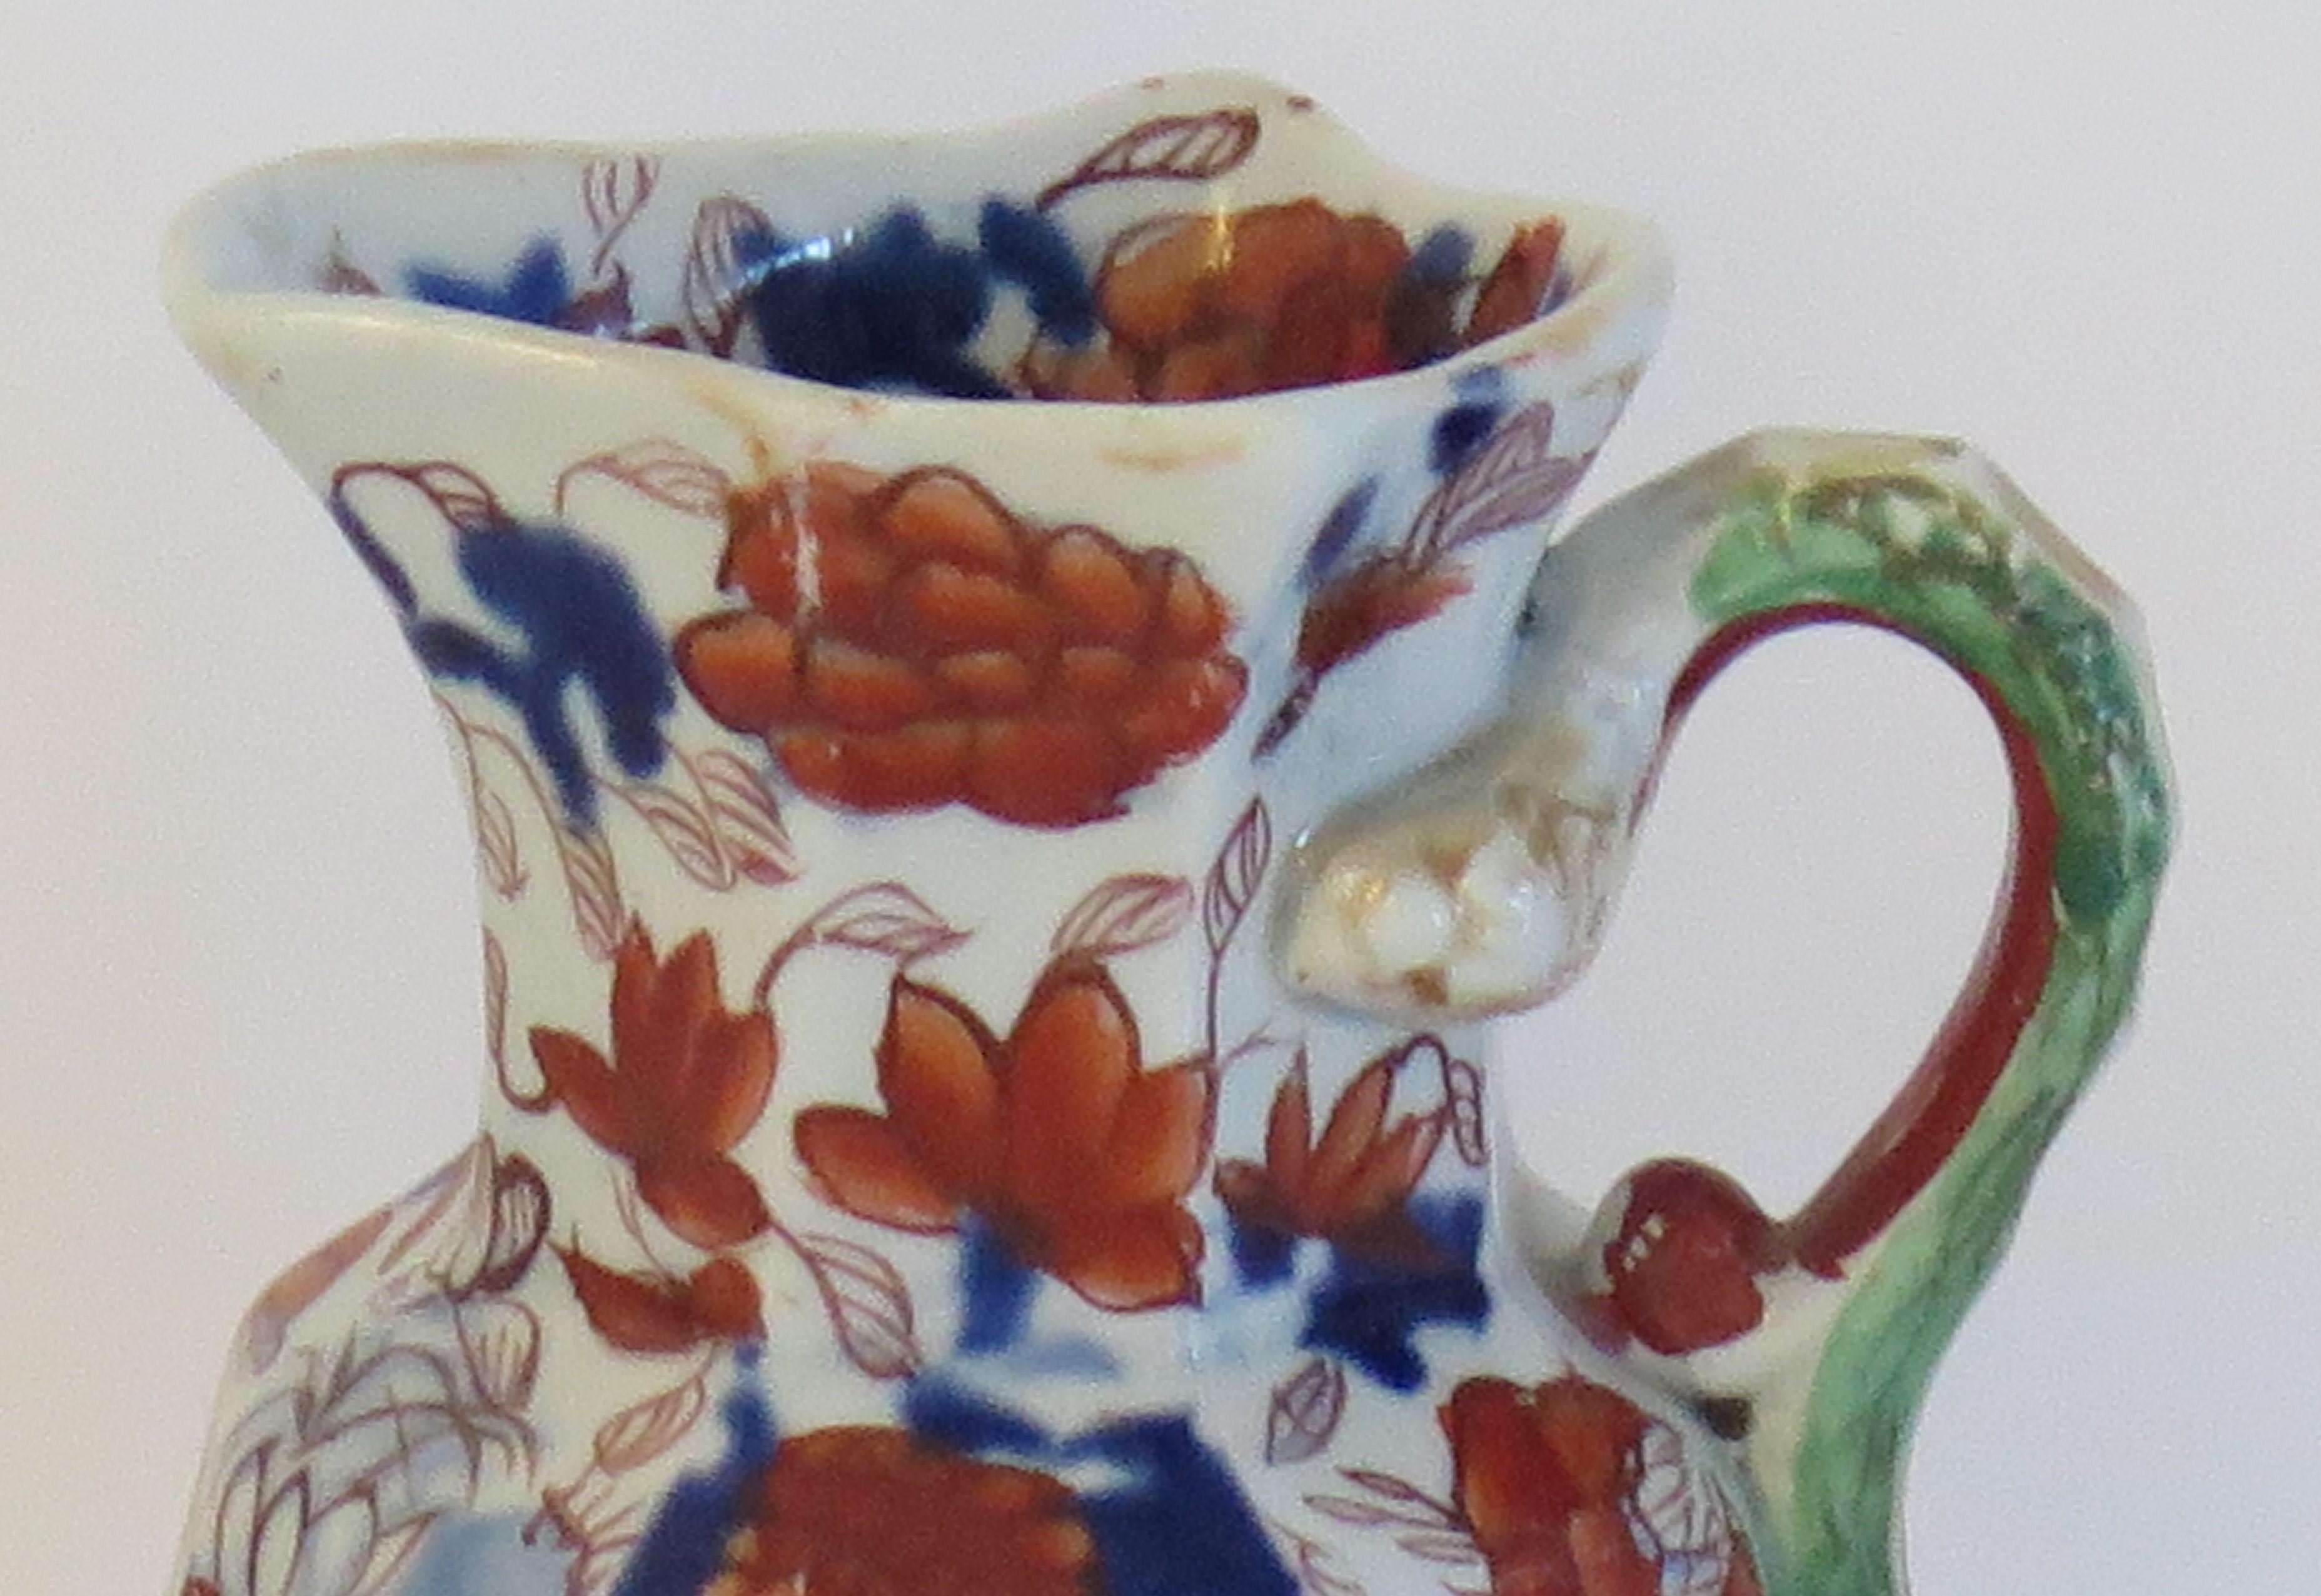 This is a good, early and small  Mason's Ironstone hydra jug or pitcher in the Basket Japan pattern, made in the English, late Georgian period, circa 1815-1820.

These hydra jugs were made in a large range of sizes with the rarer pieces being the